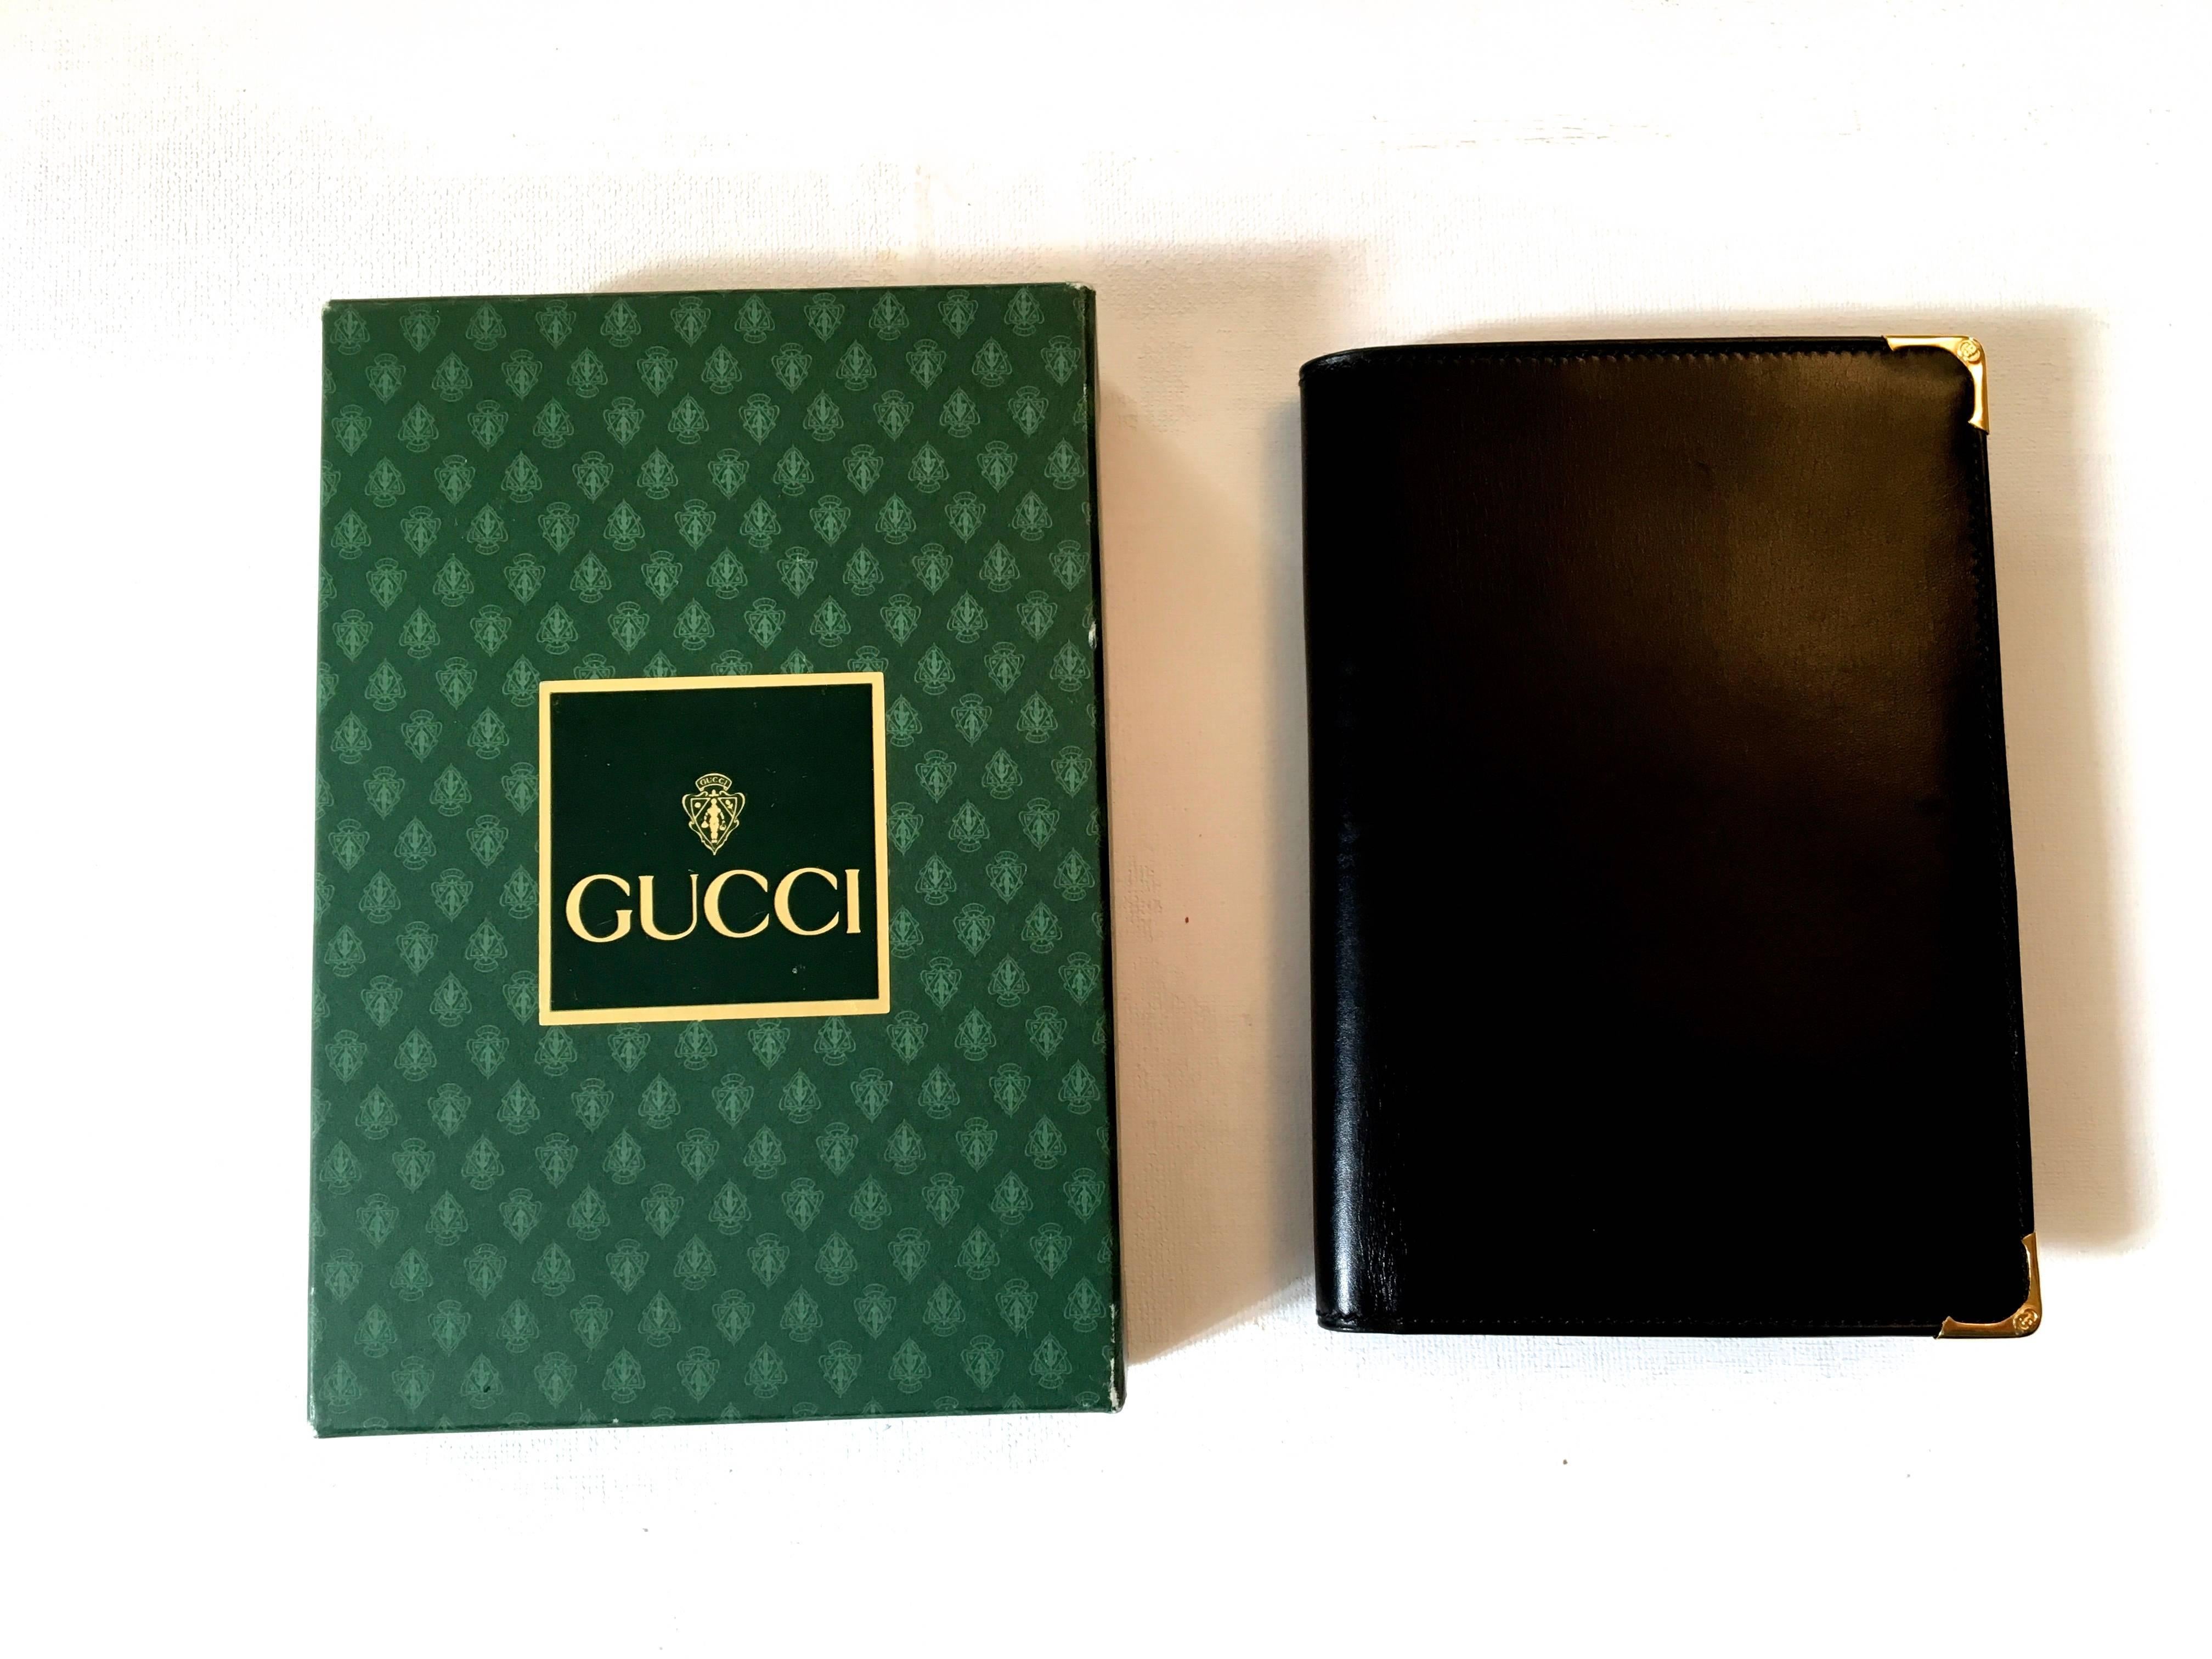 Presented here is a gorgeous vintage cigar / eyeglasses case from Gucci from the early 1980's. The case has never been used and is in its original box. The cigar case is comprised of dark navy blue box leather. On the interior of the cigar case,